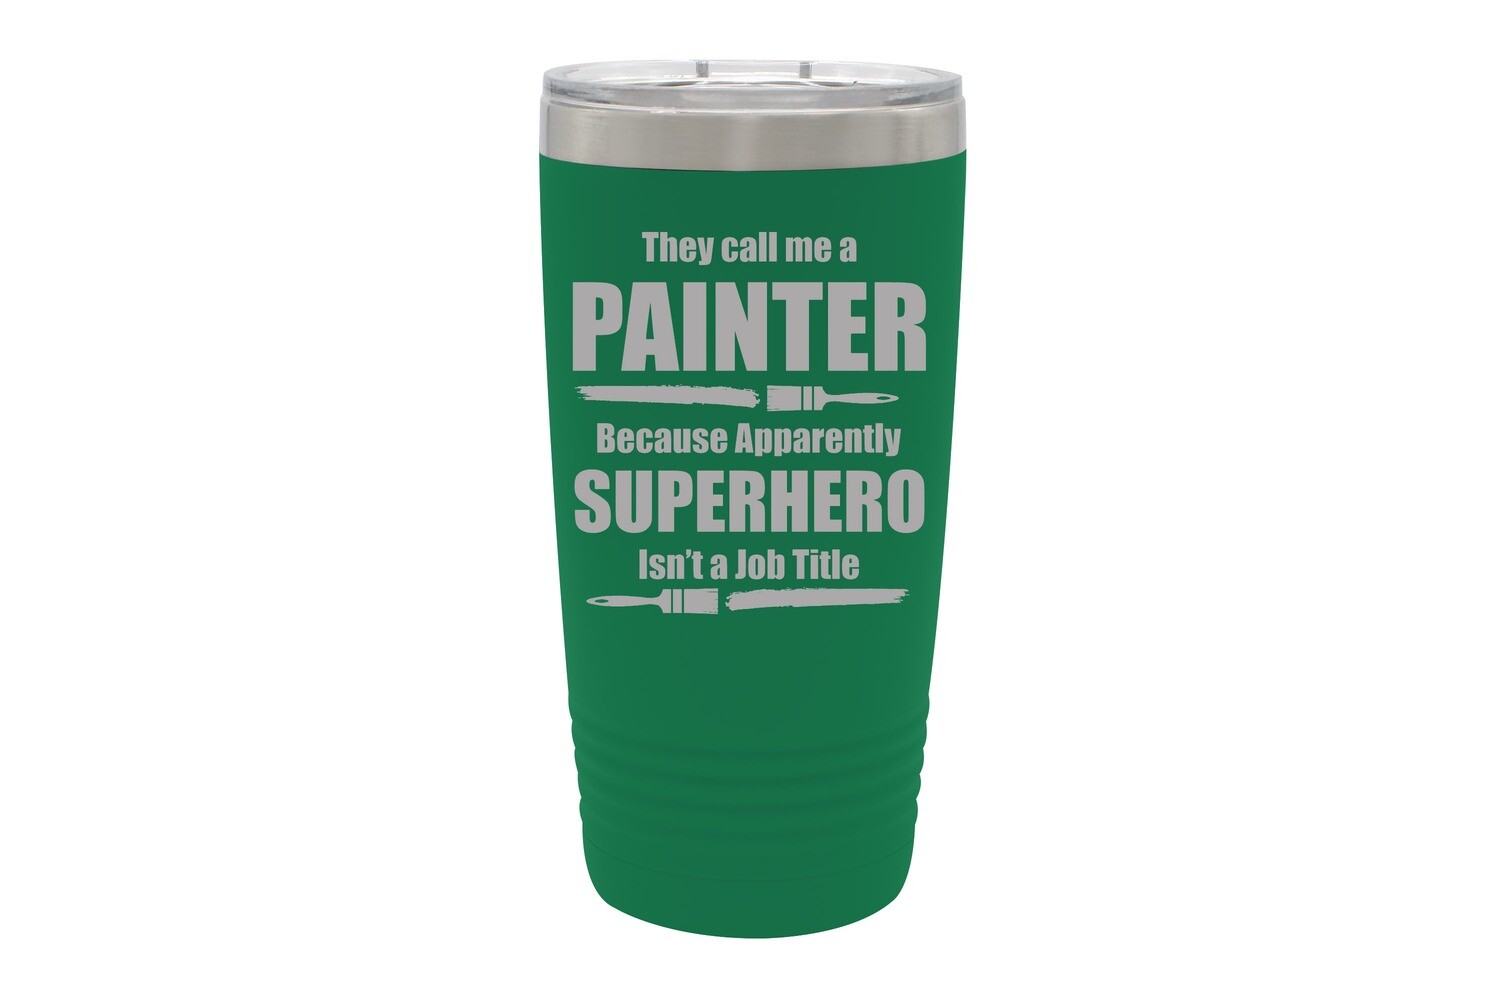 They call me a Painter (or Your job) because apparently Superhero isn't a Job Title Insulated Tumbler 20 oz